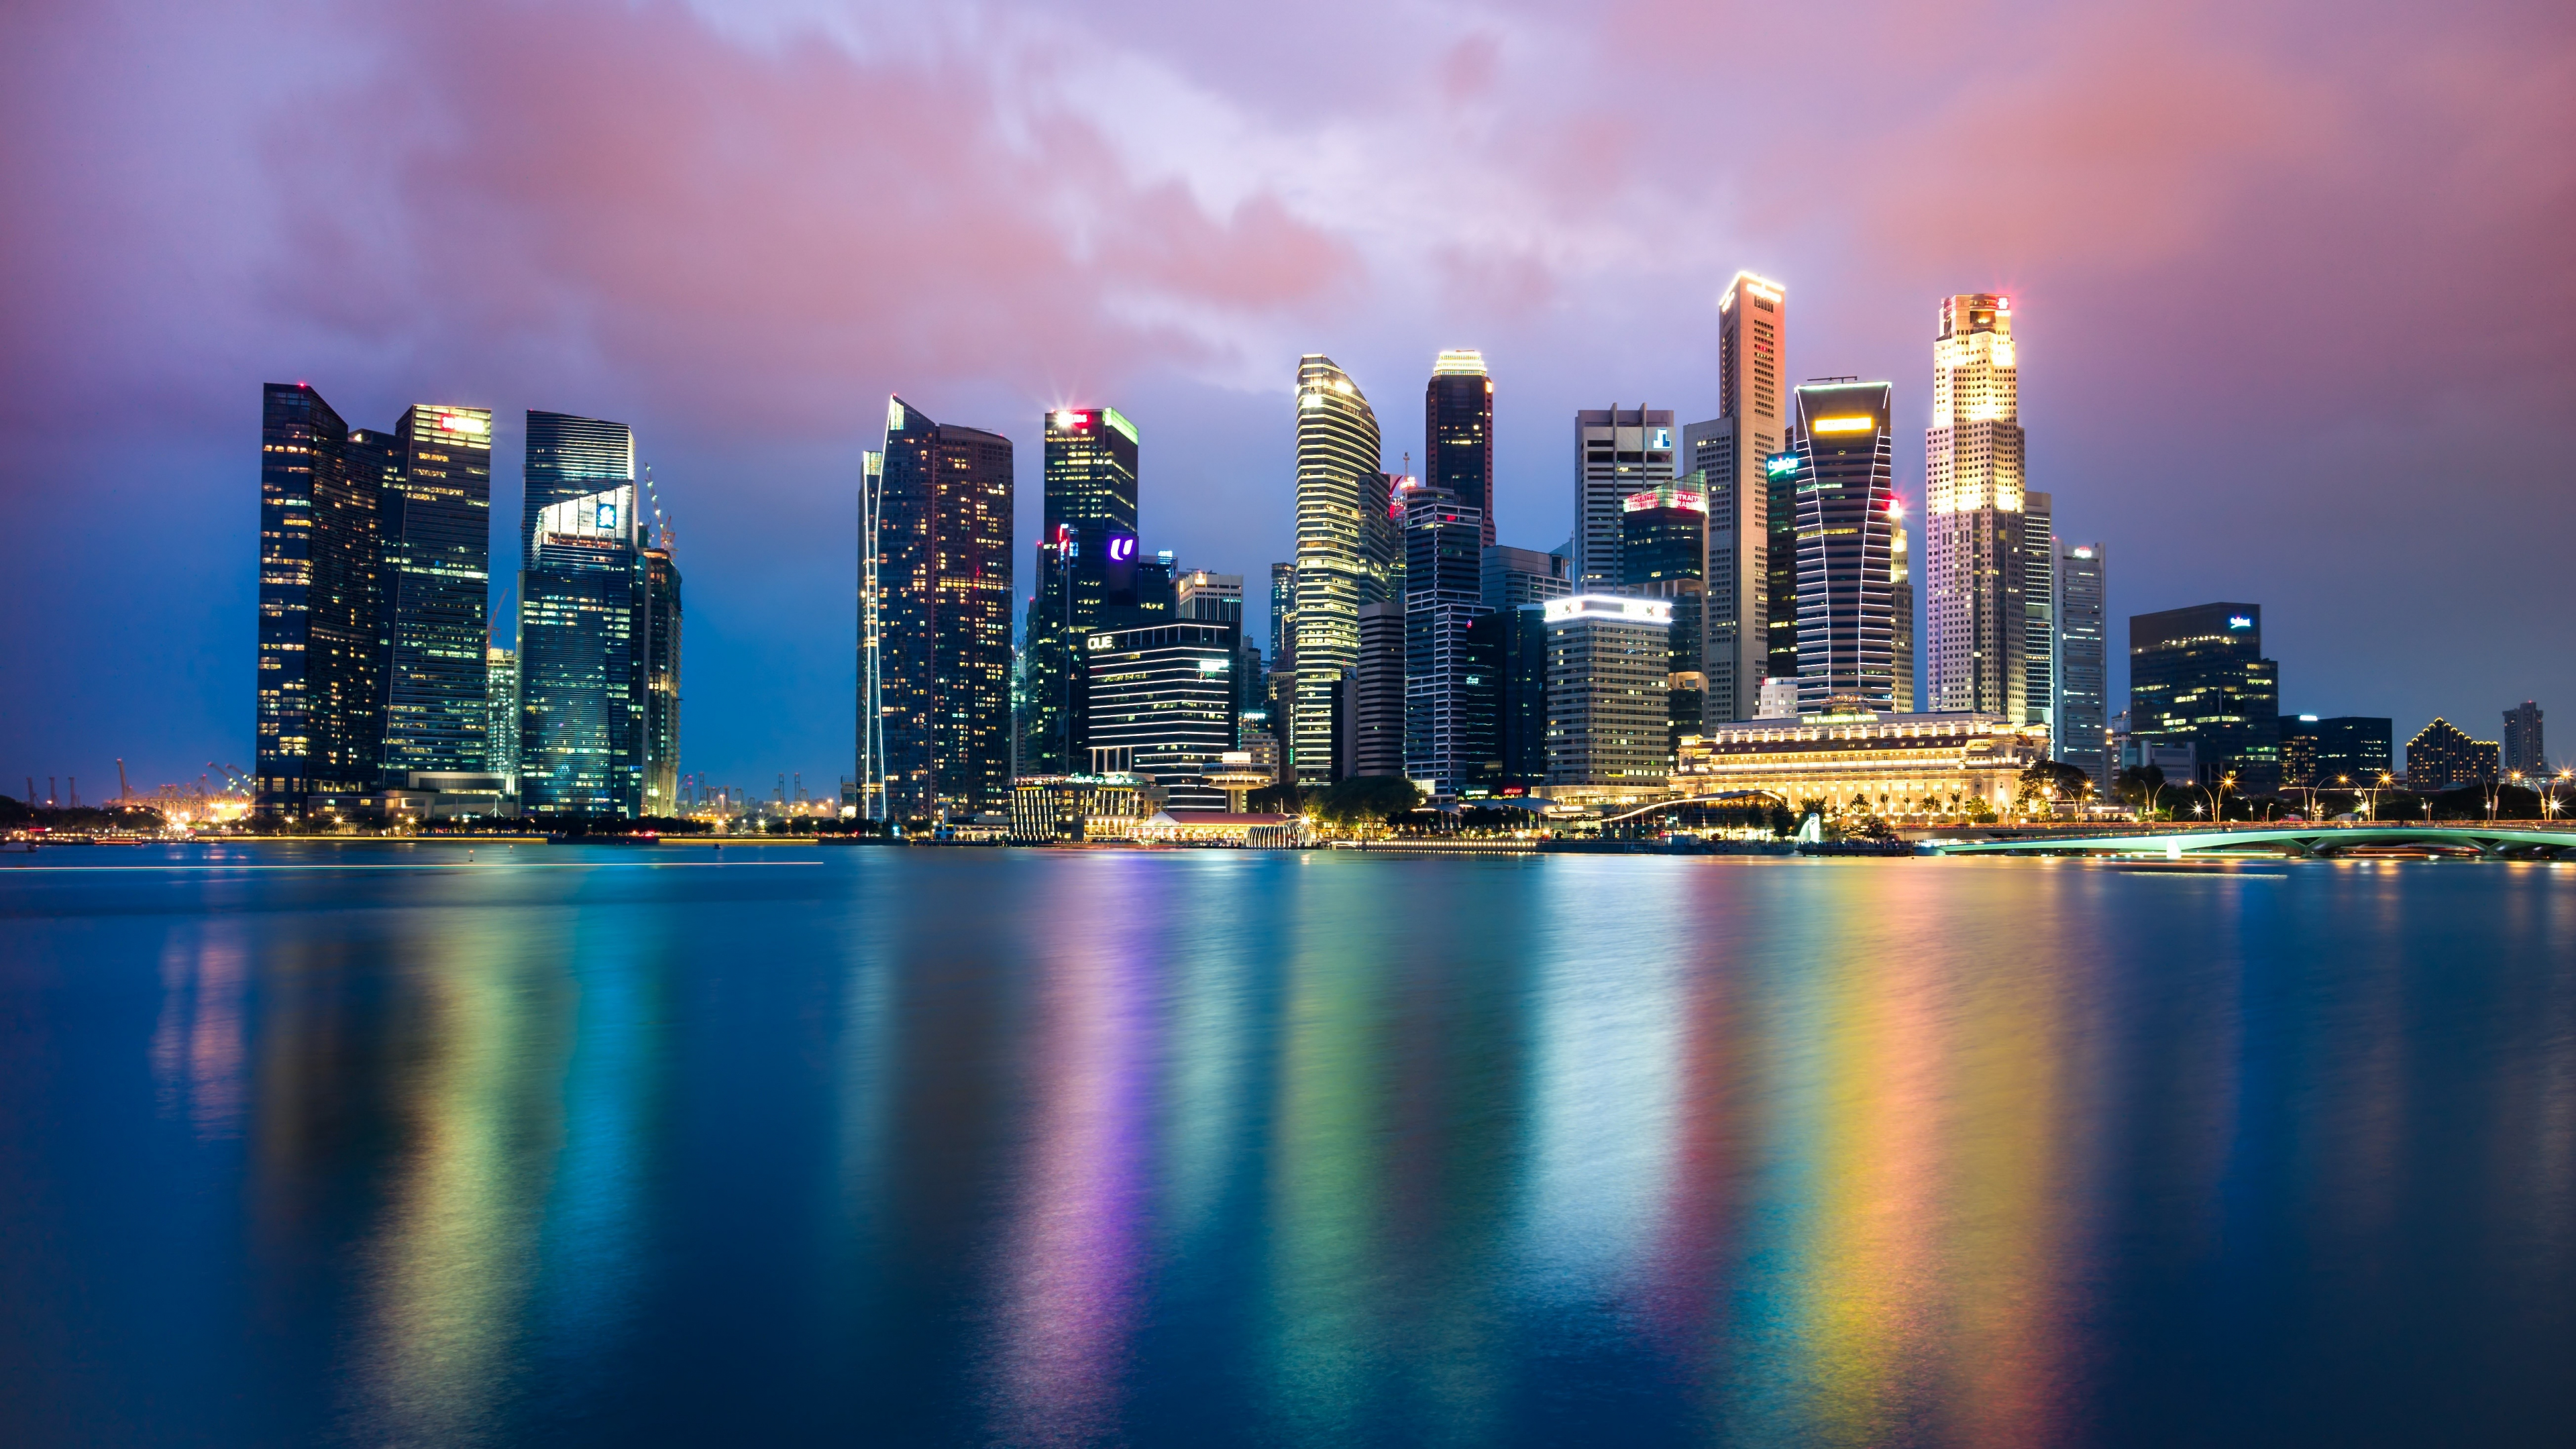 Singapore Photos Download The BEST Free Singapore Stock Photos  HD Images